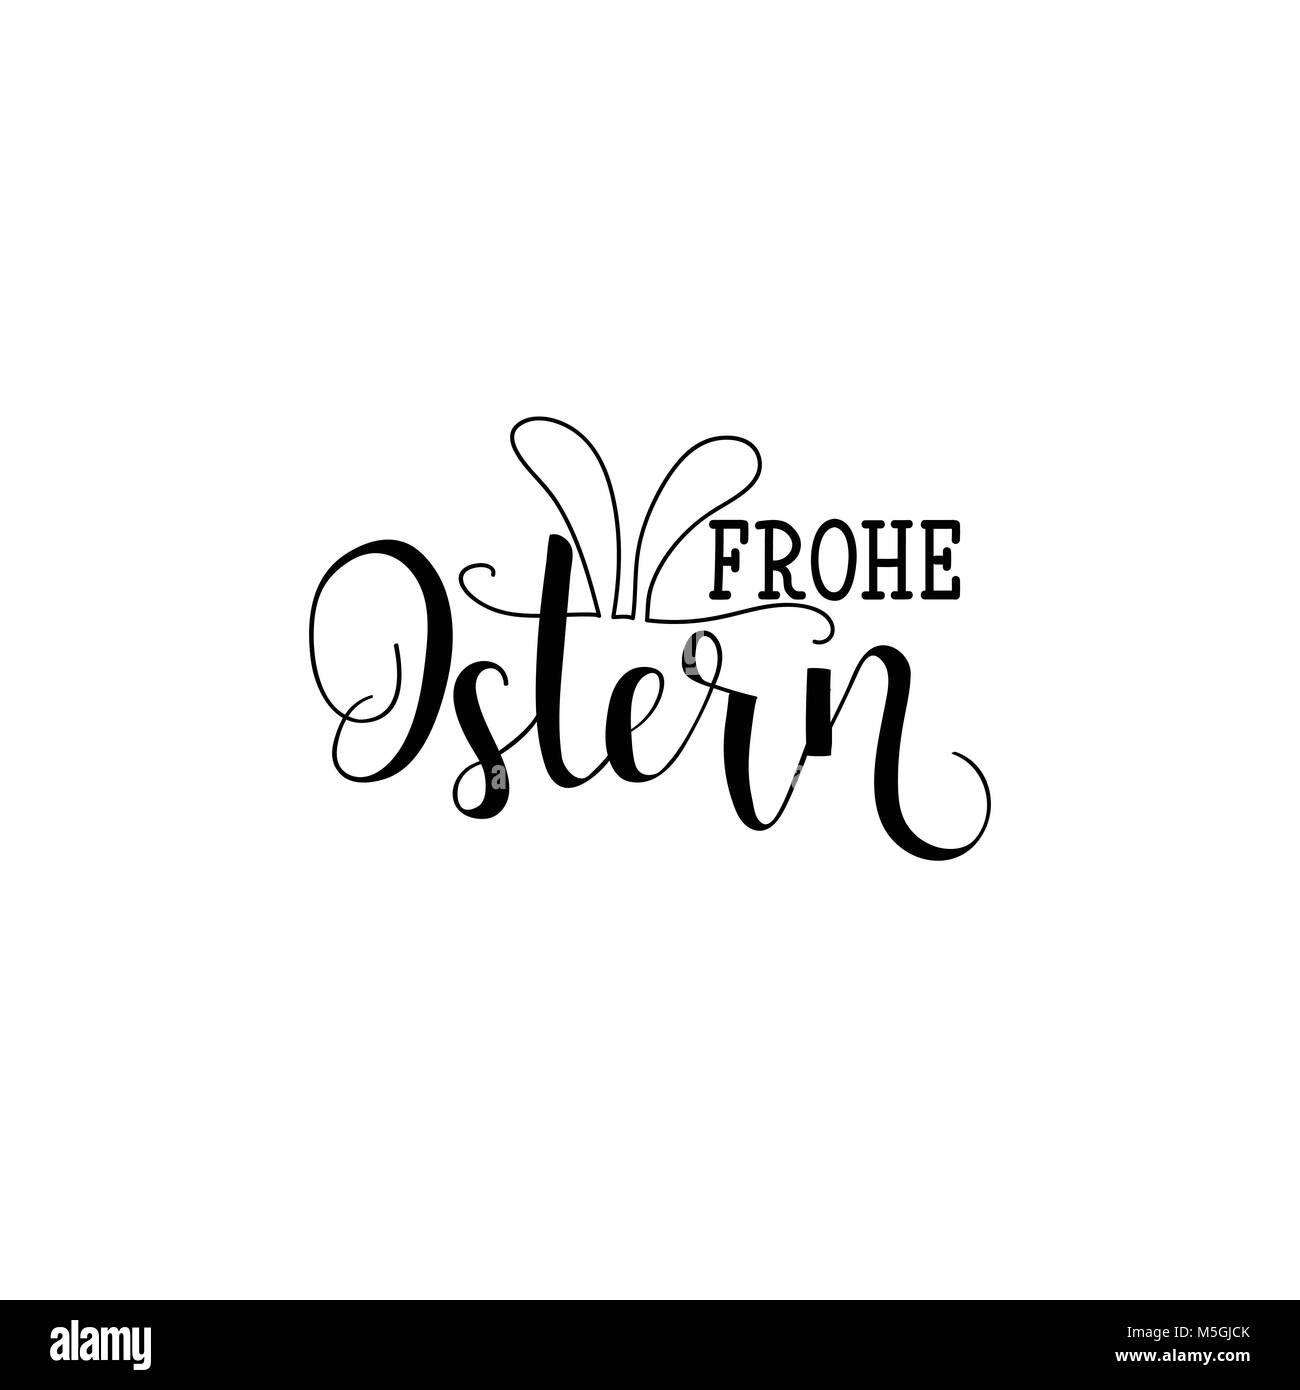 Frohe Ostern. Lettering. Translation from German: Happy Easter. quote to design greeting card, poster, banner, printable wall art, t-shirt and other,  Stock Vector